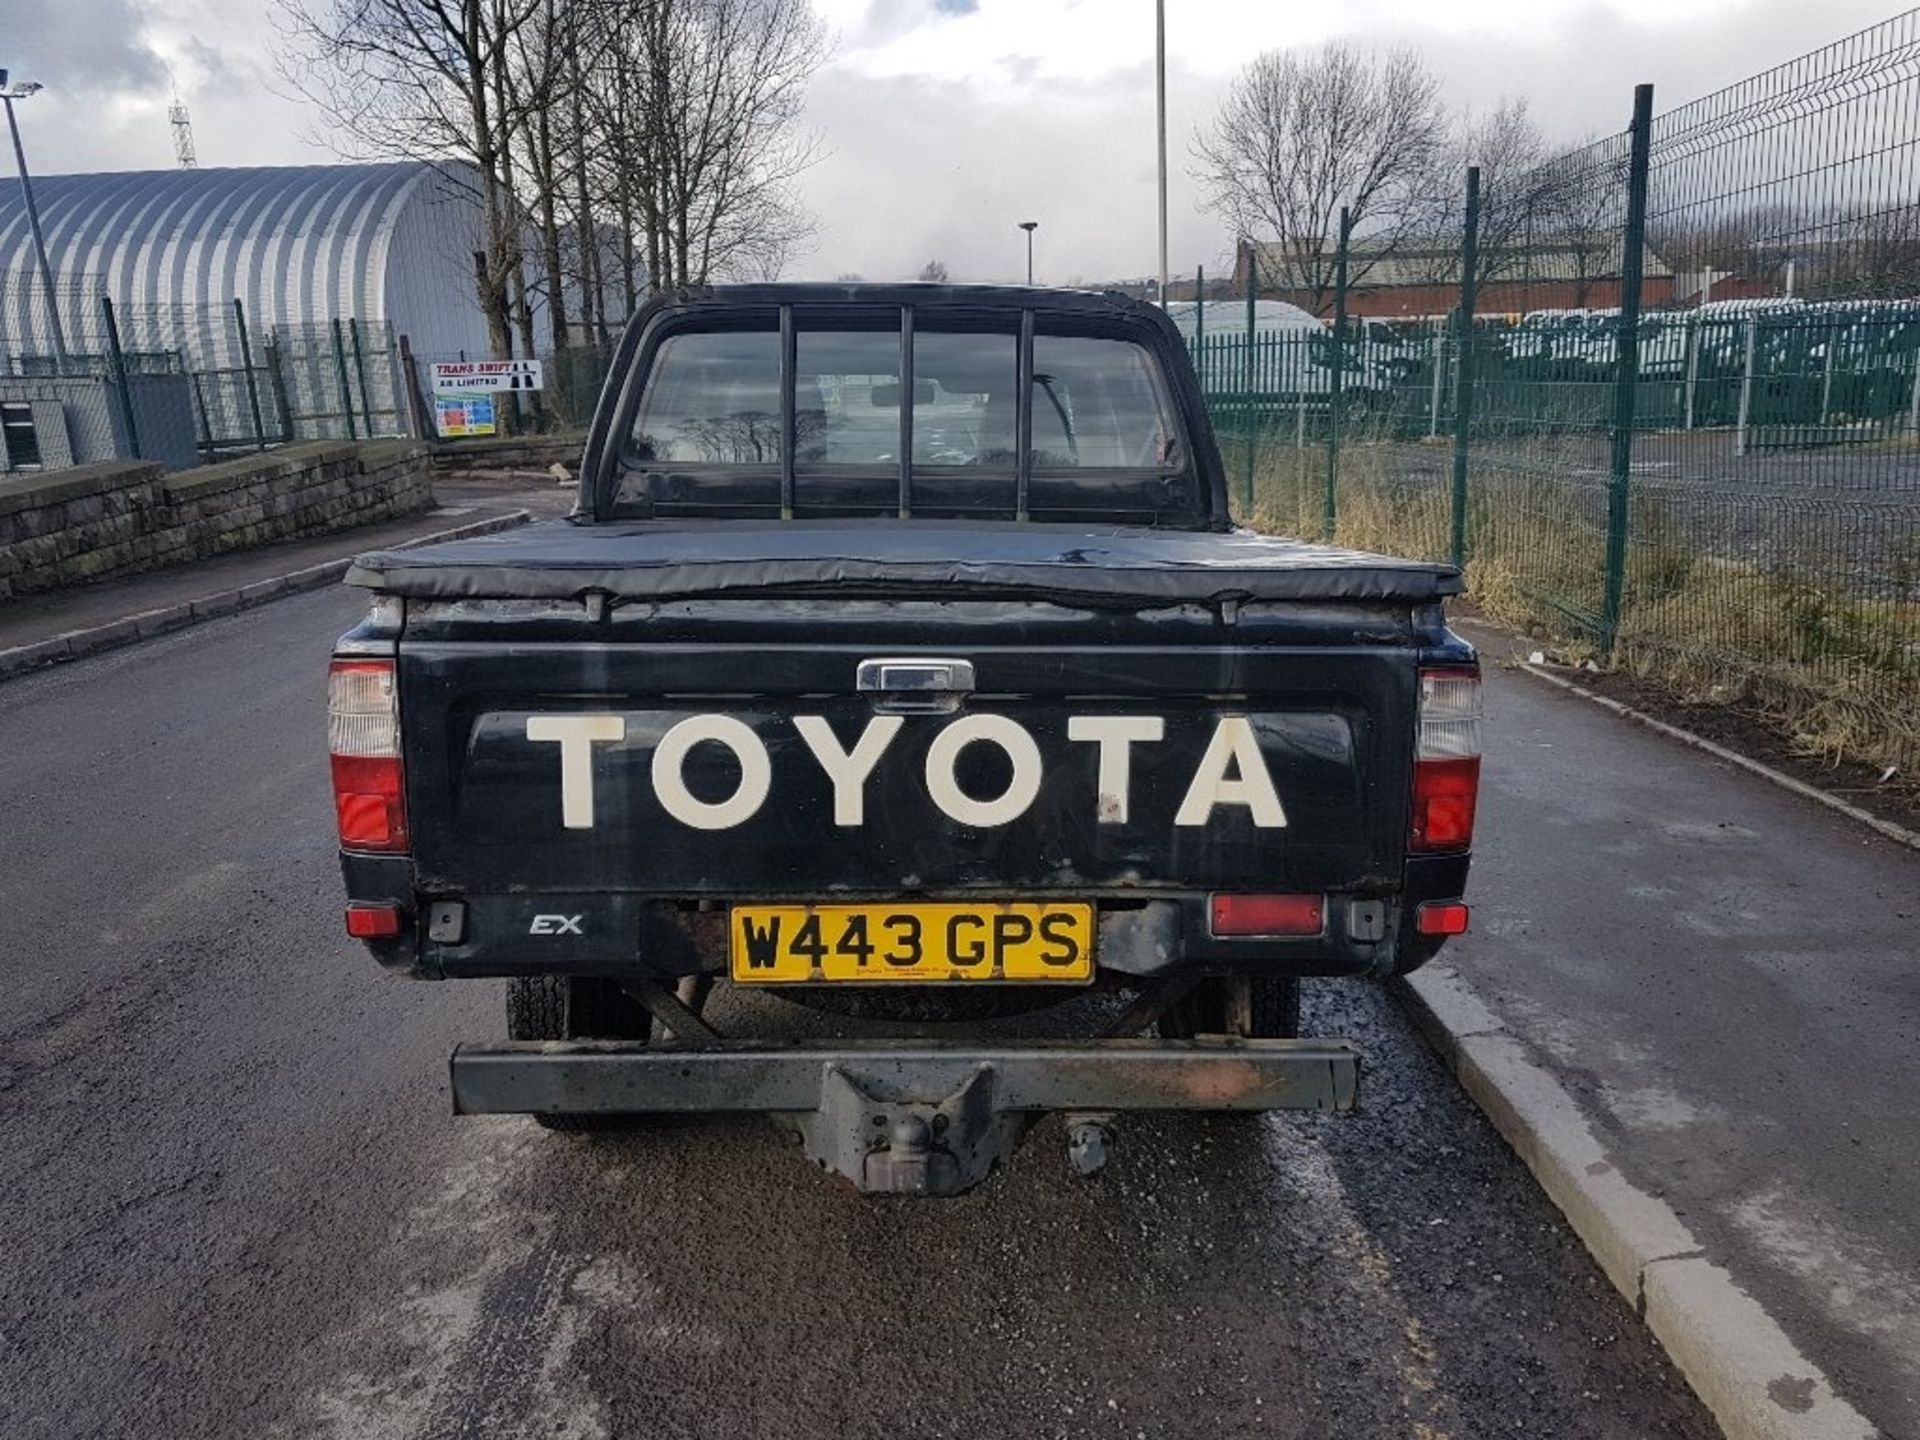 TOYOTA, HILUX 2.4 EX 4X4, W443 GPS, FIRST DATE OF REGISTRATION 02/08/2000, 2.4 LITRE TD, DIESEL, - Image 10 of 14